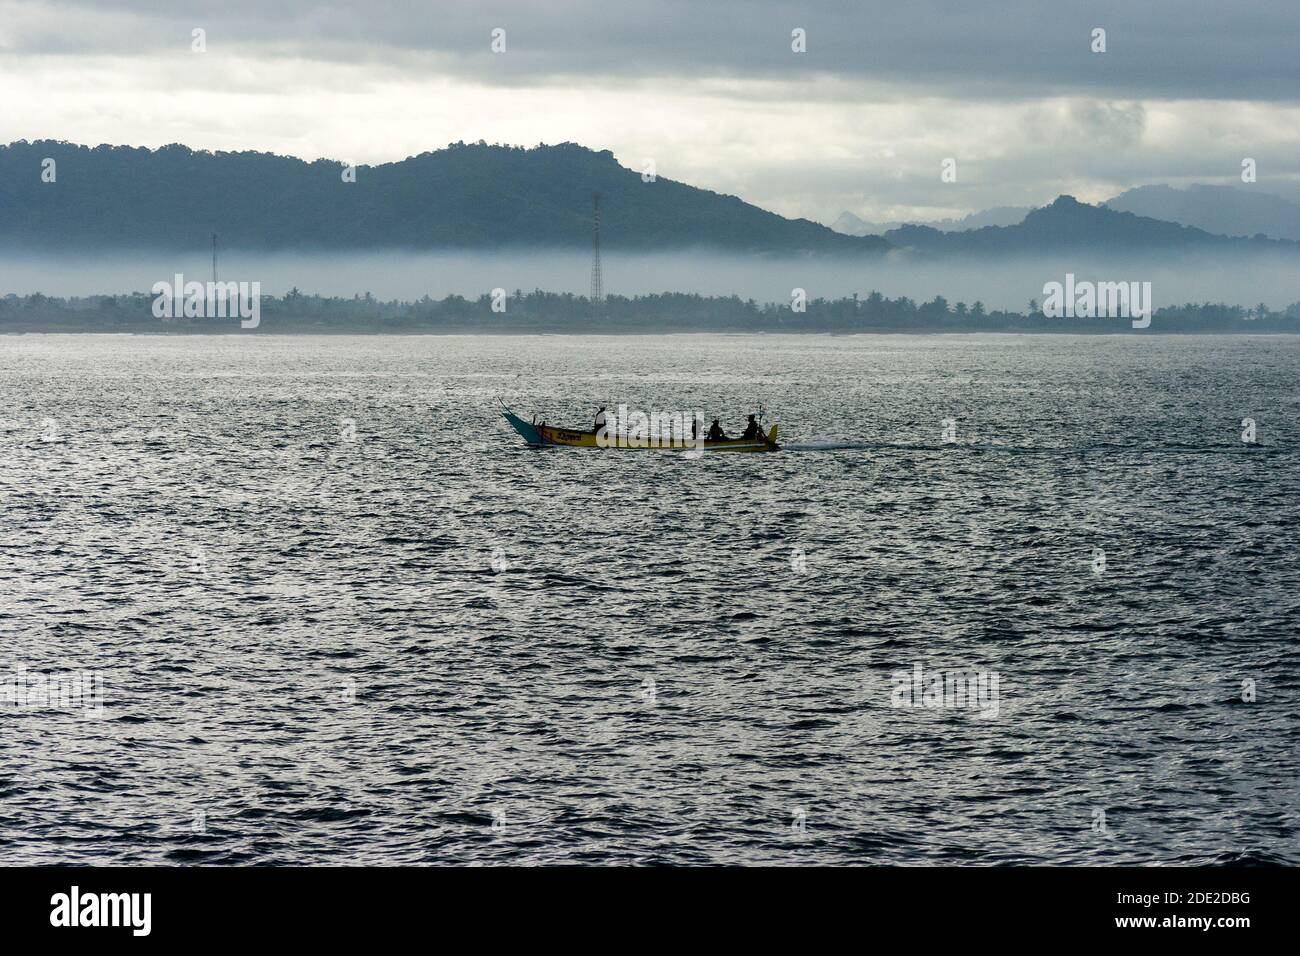 The morning activity of the fishermen at Papuma beach, they go to look for fish by traditional boats. Stock Photo